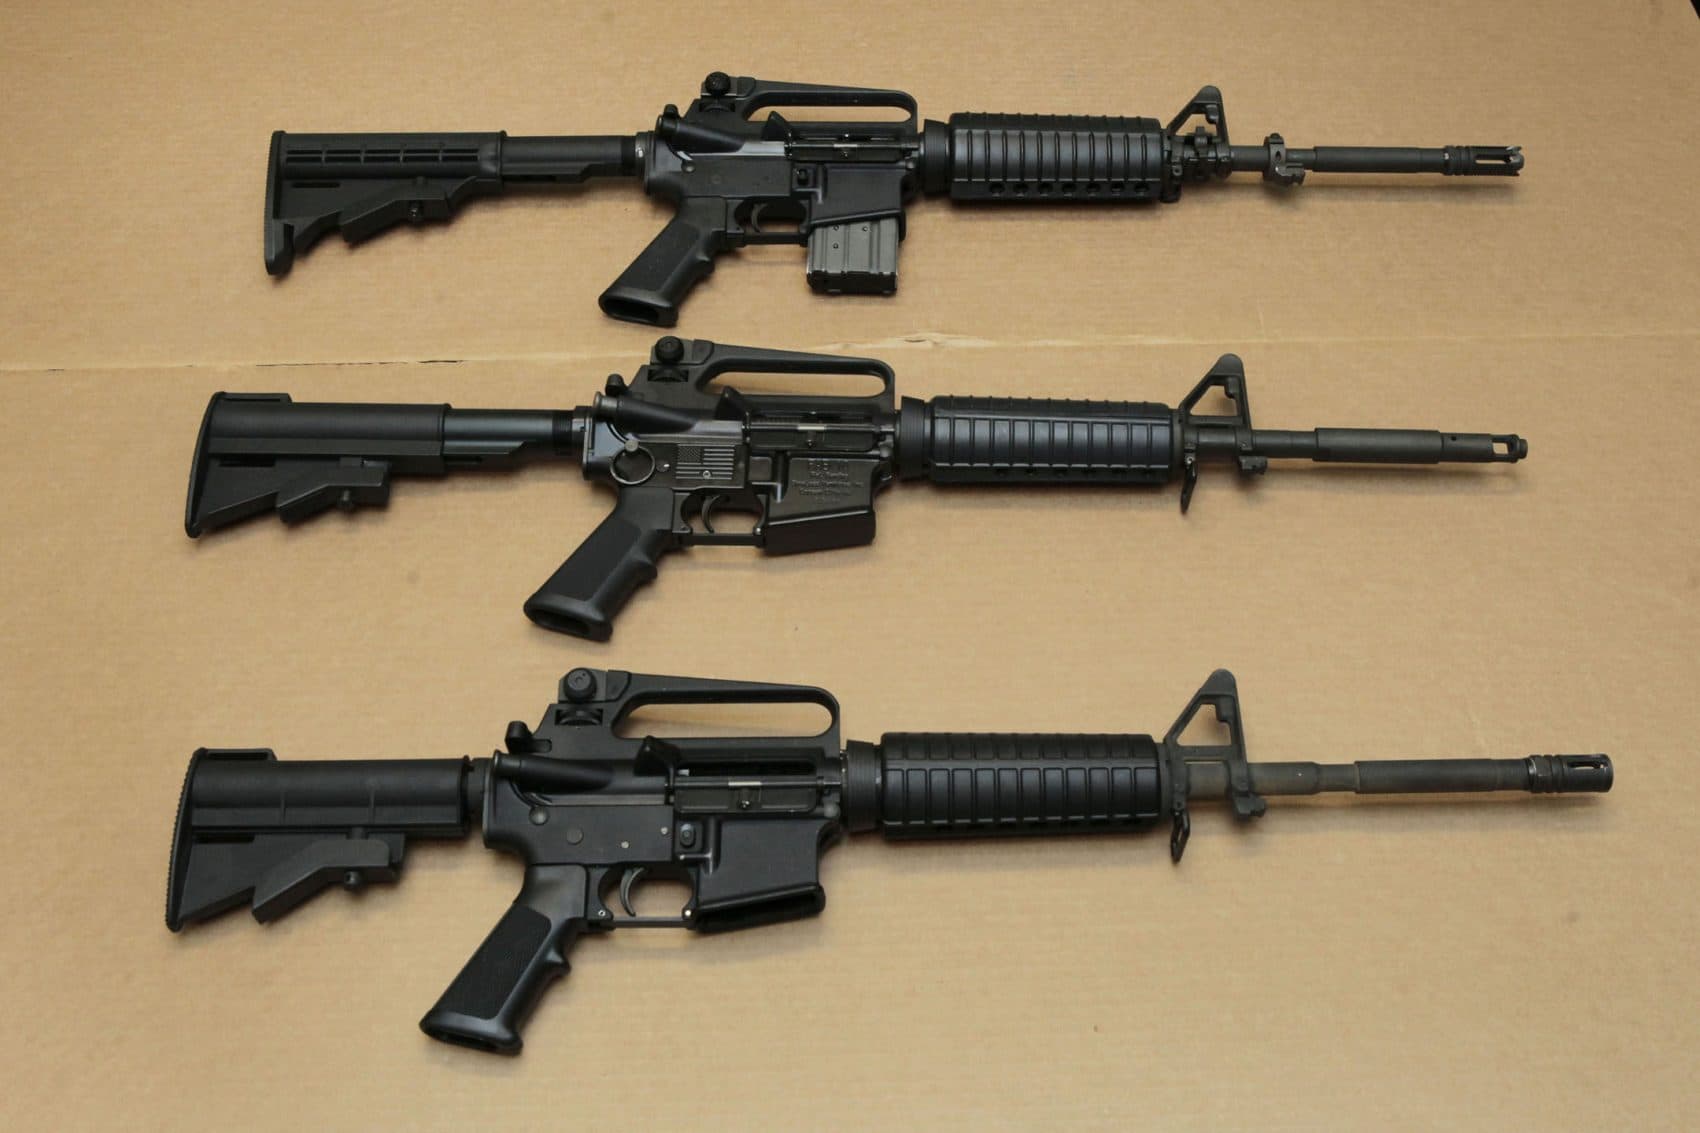 In this Aug. 15, 2012 file photo, three variations of the AR-15 assault rifle are displayed at the California Department of Justice in Sacramento, Calif. (Rich Pedroncelli / AP)